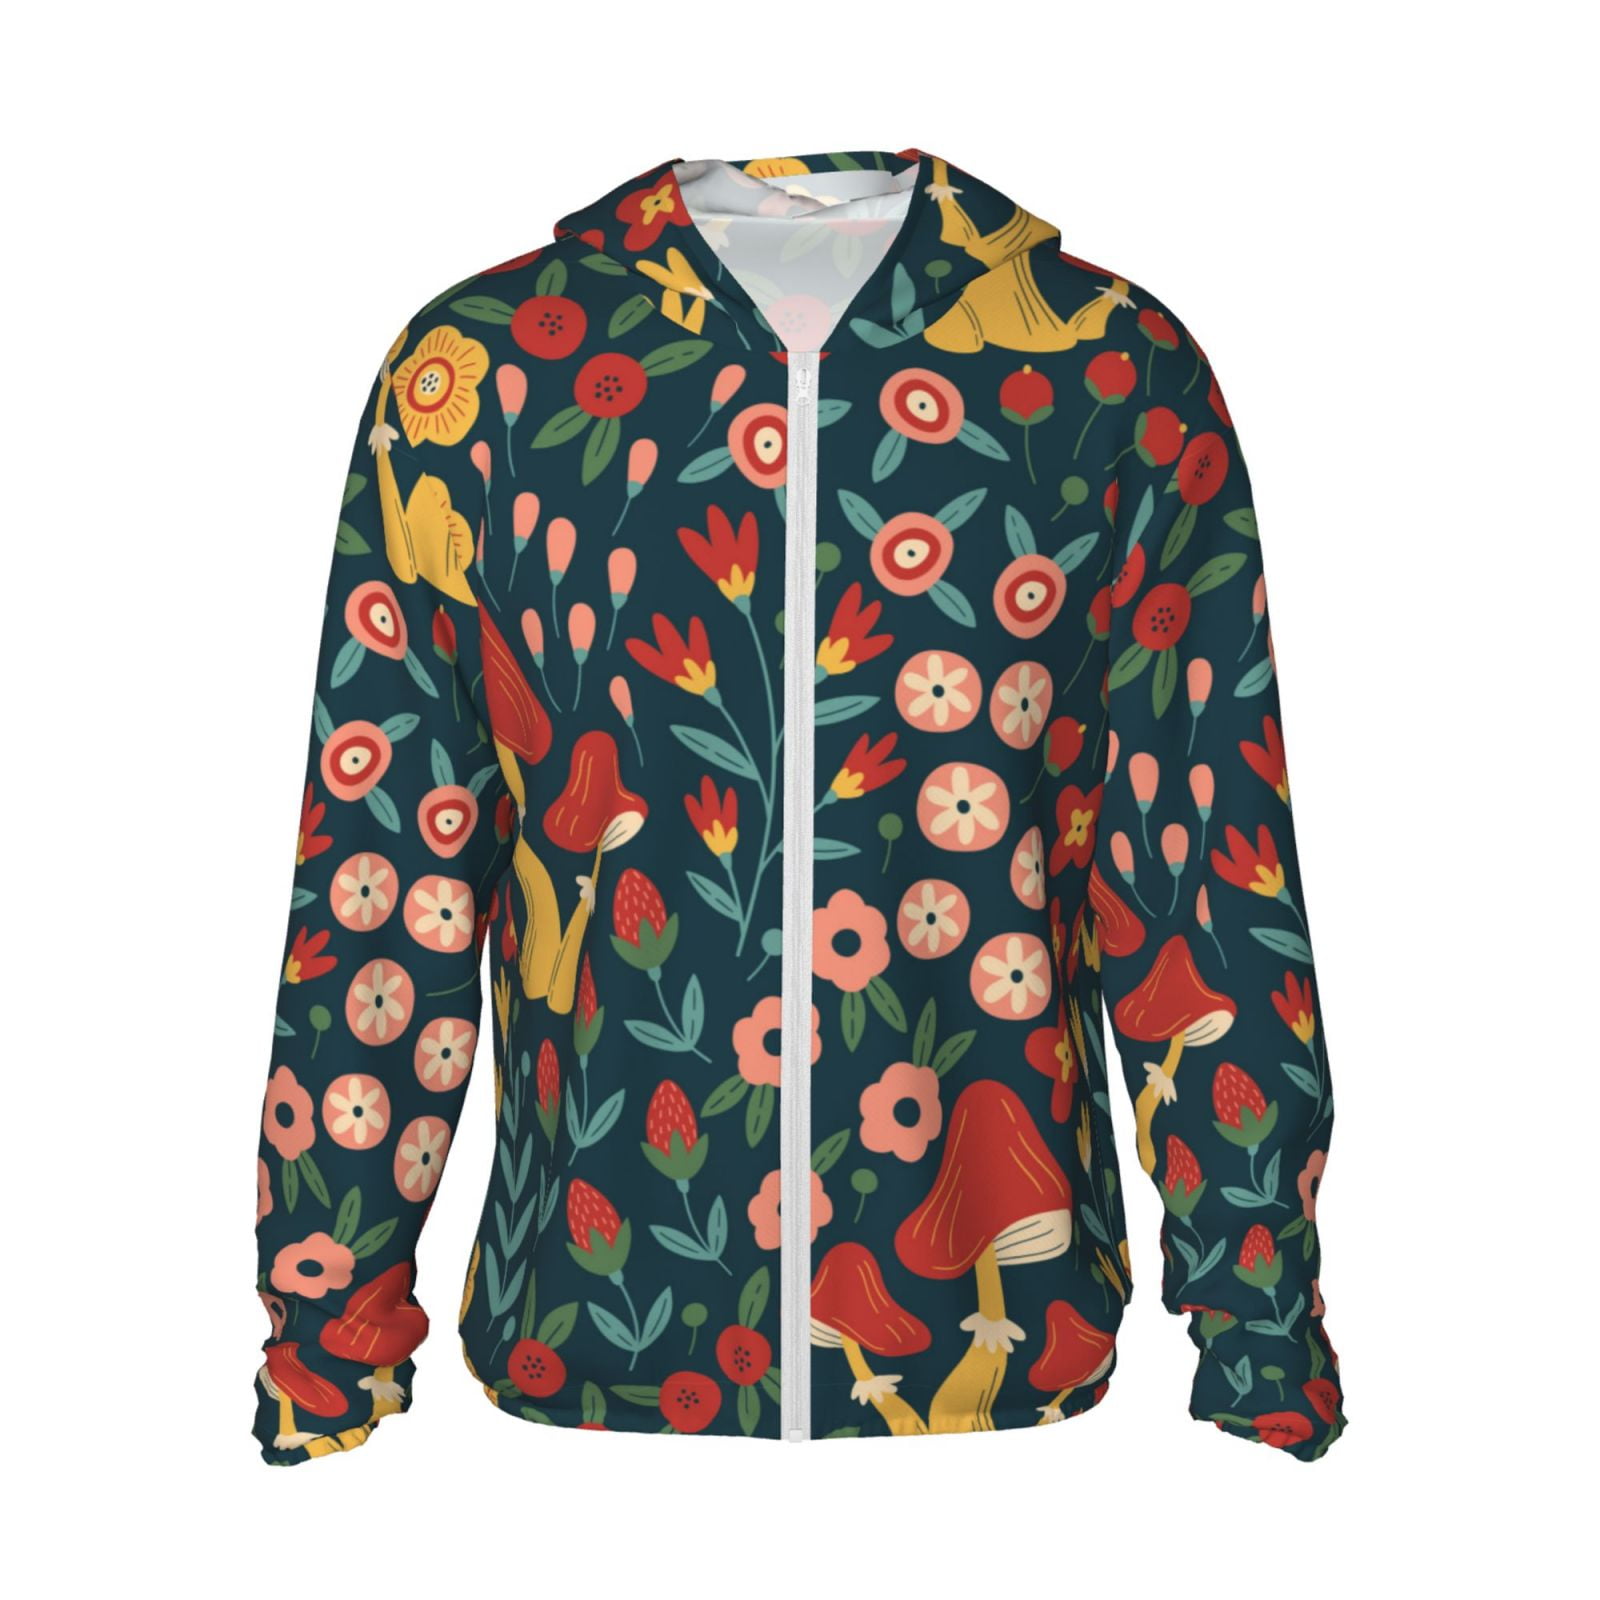 Fotbe Berries and Flowers Men's Women's UPF 50+ Sun Protection Jacket ...